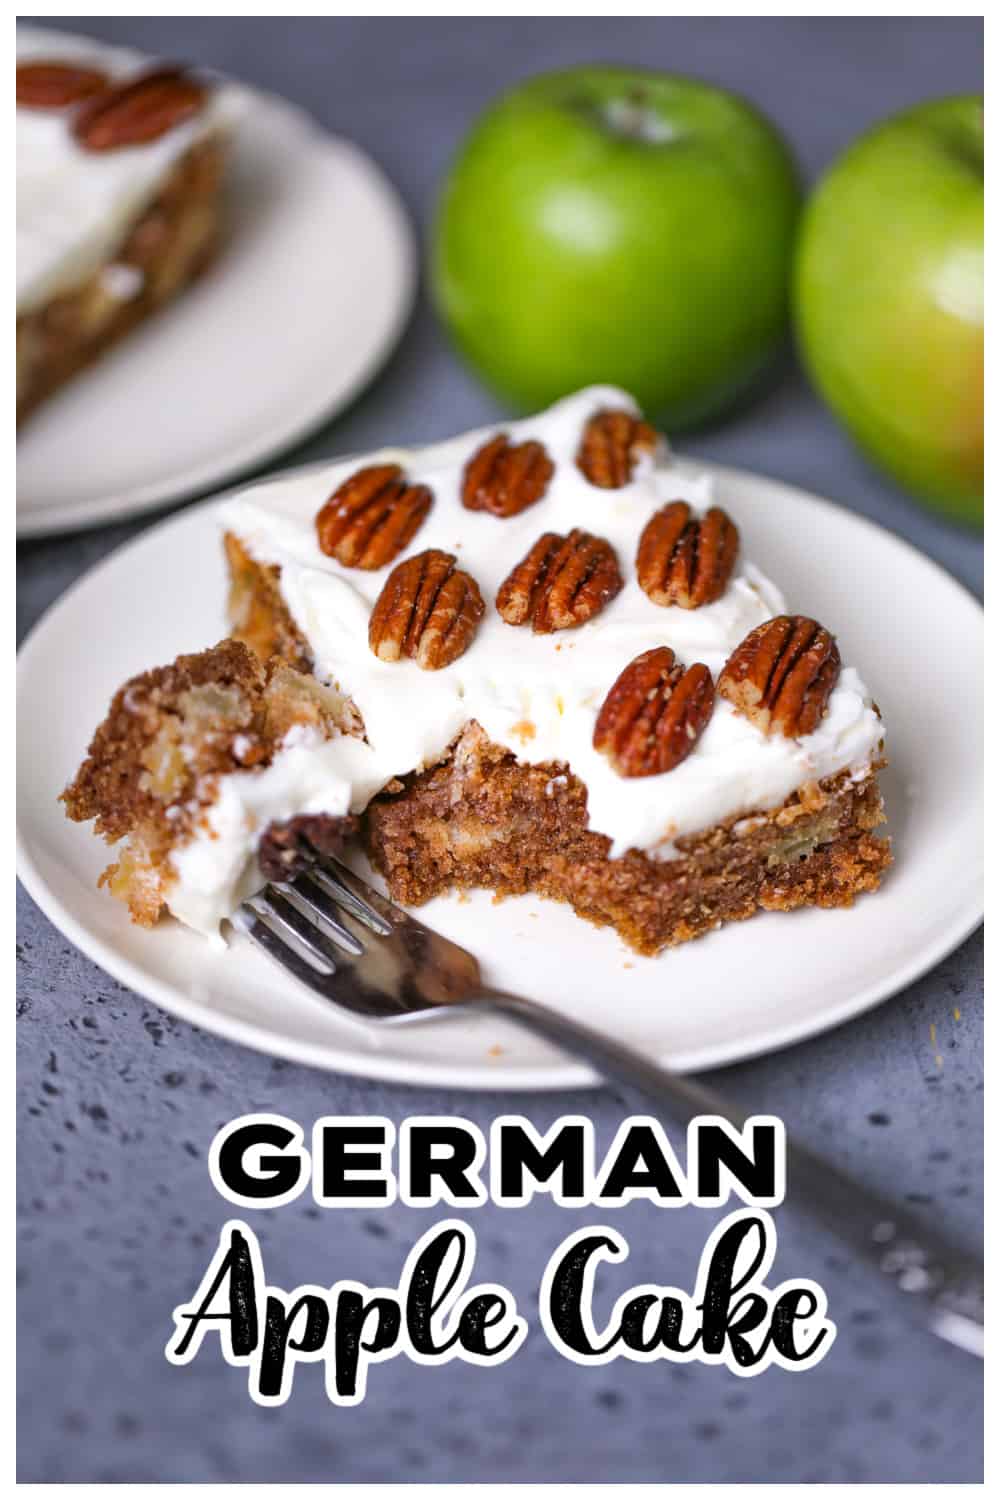 German Spiced Apple Cake recipe cream cheese frosting